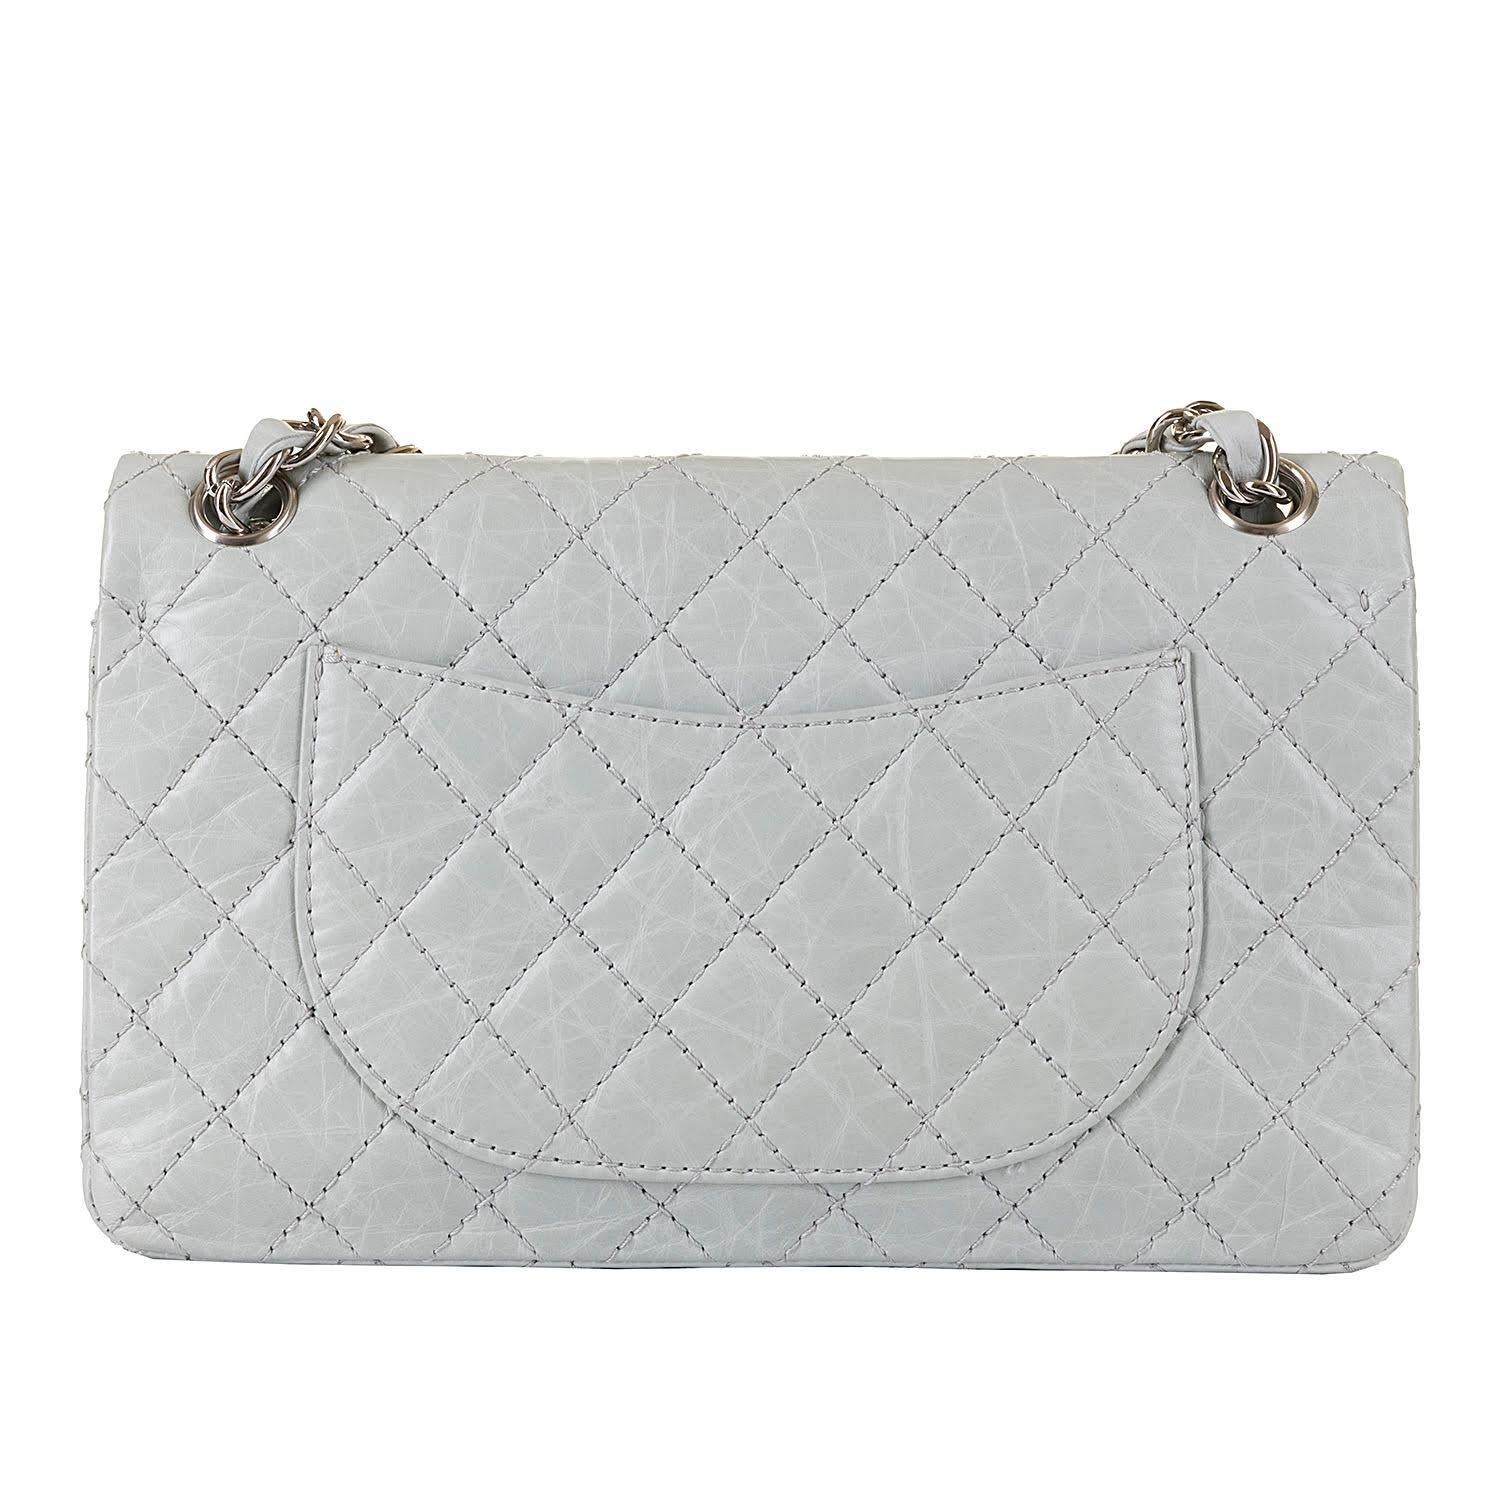 Gorgeous colour, Pristine condition, this very chic Chanel medium, double-flap, Sac Timeless Bag, is finished in 'Eau-de-Nil' quilted leather, accented with silver hardware, and is in pristine, 'New & Unused' condition, throughout. A rare colour